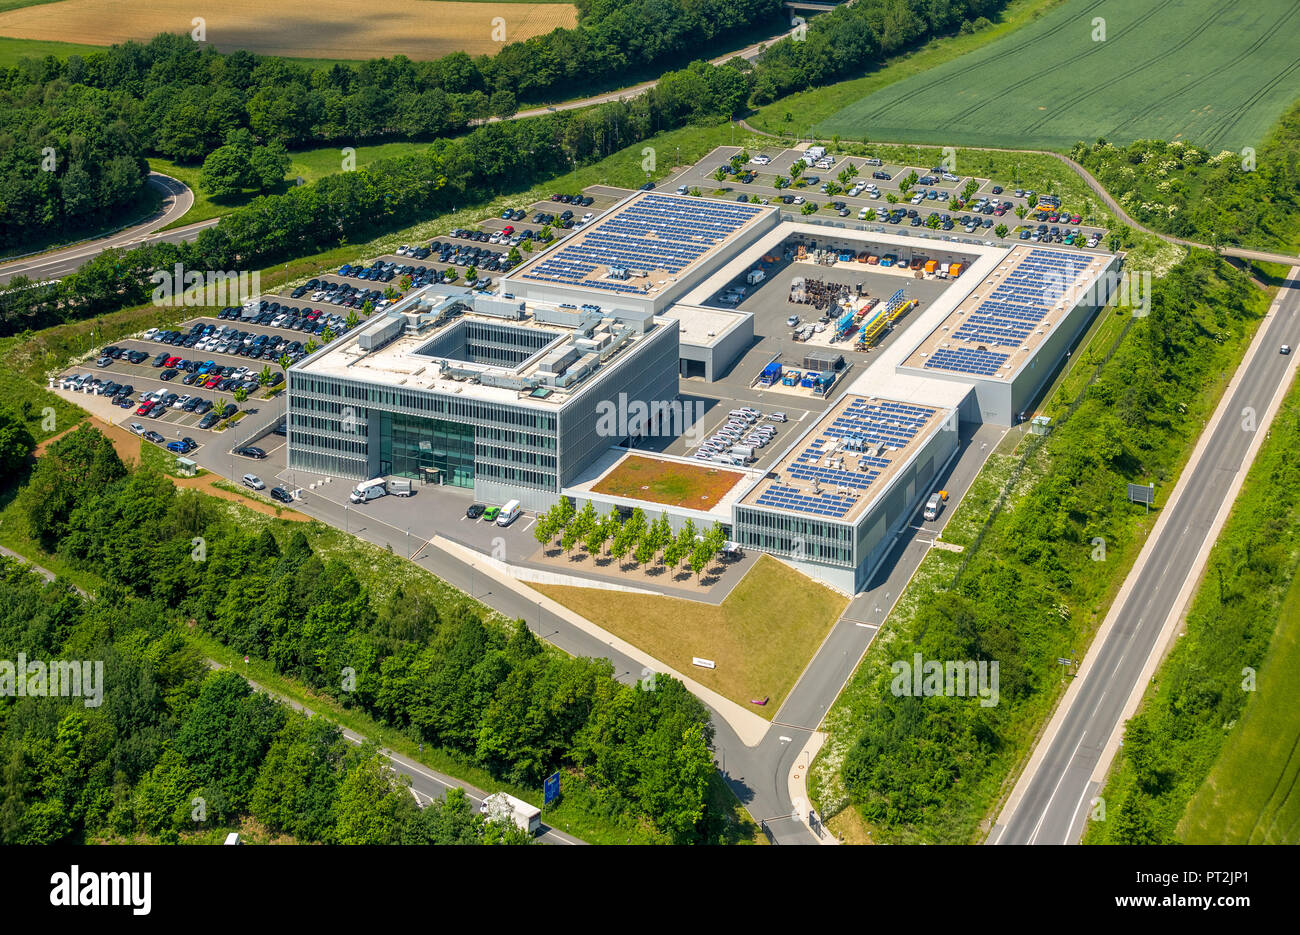 ENERVIE - Südwestfalen Energie and Wasser AG, power supply company, Hassley headquarters, office complex at the Sauerland line, motorway A45, Hagen, Ruhr area, North Rhine-Westphalia, Germany Stock Photo